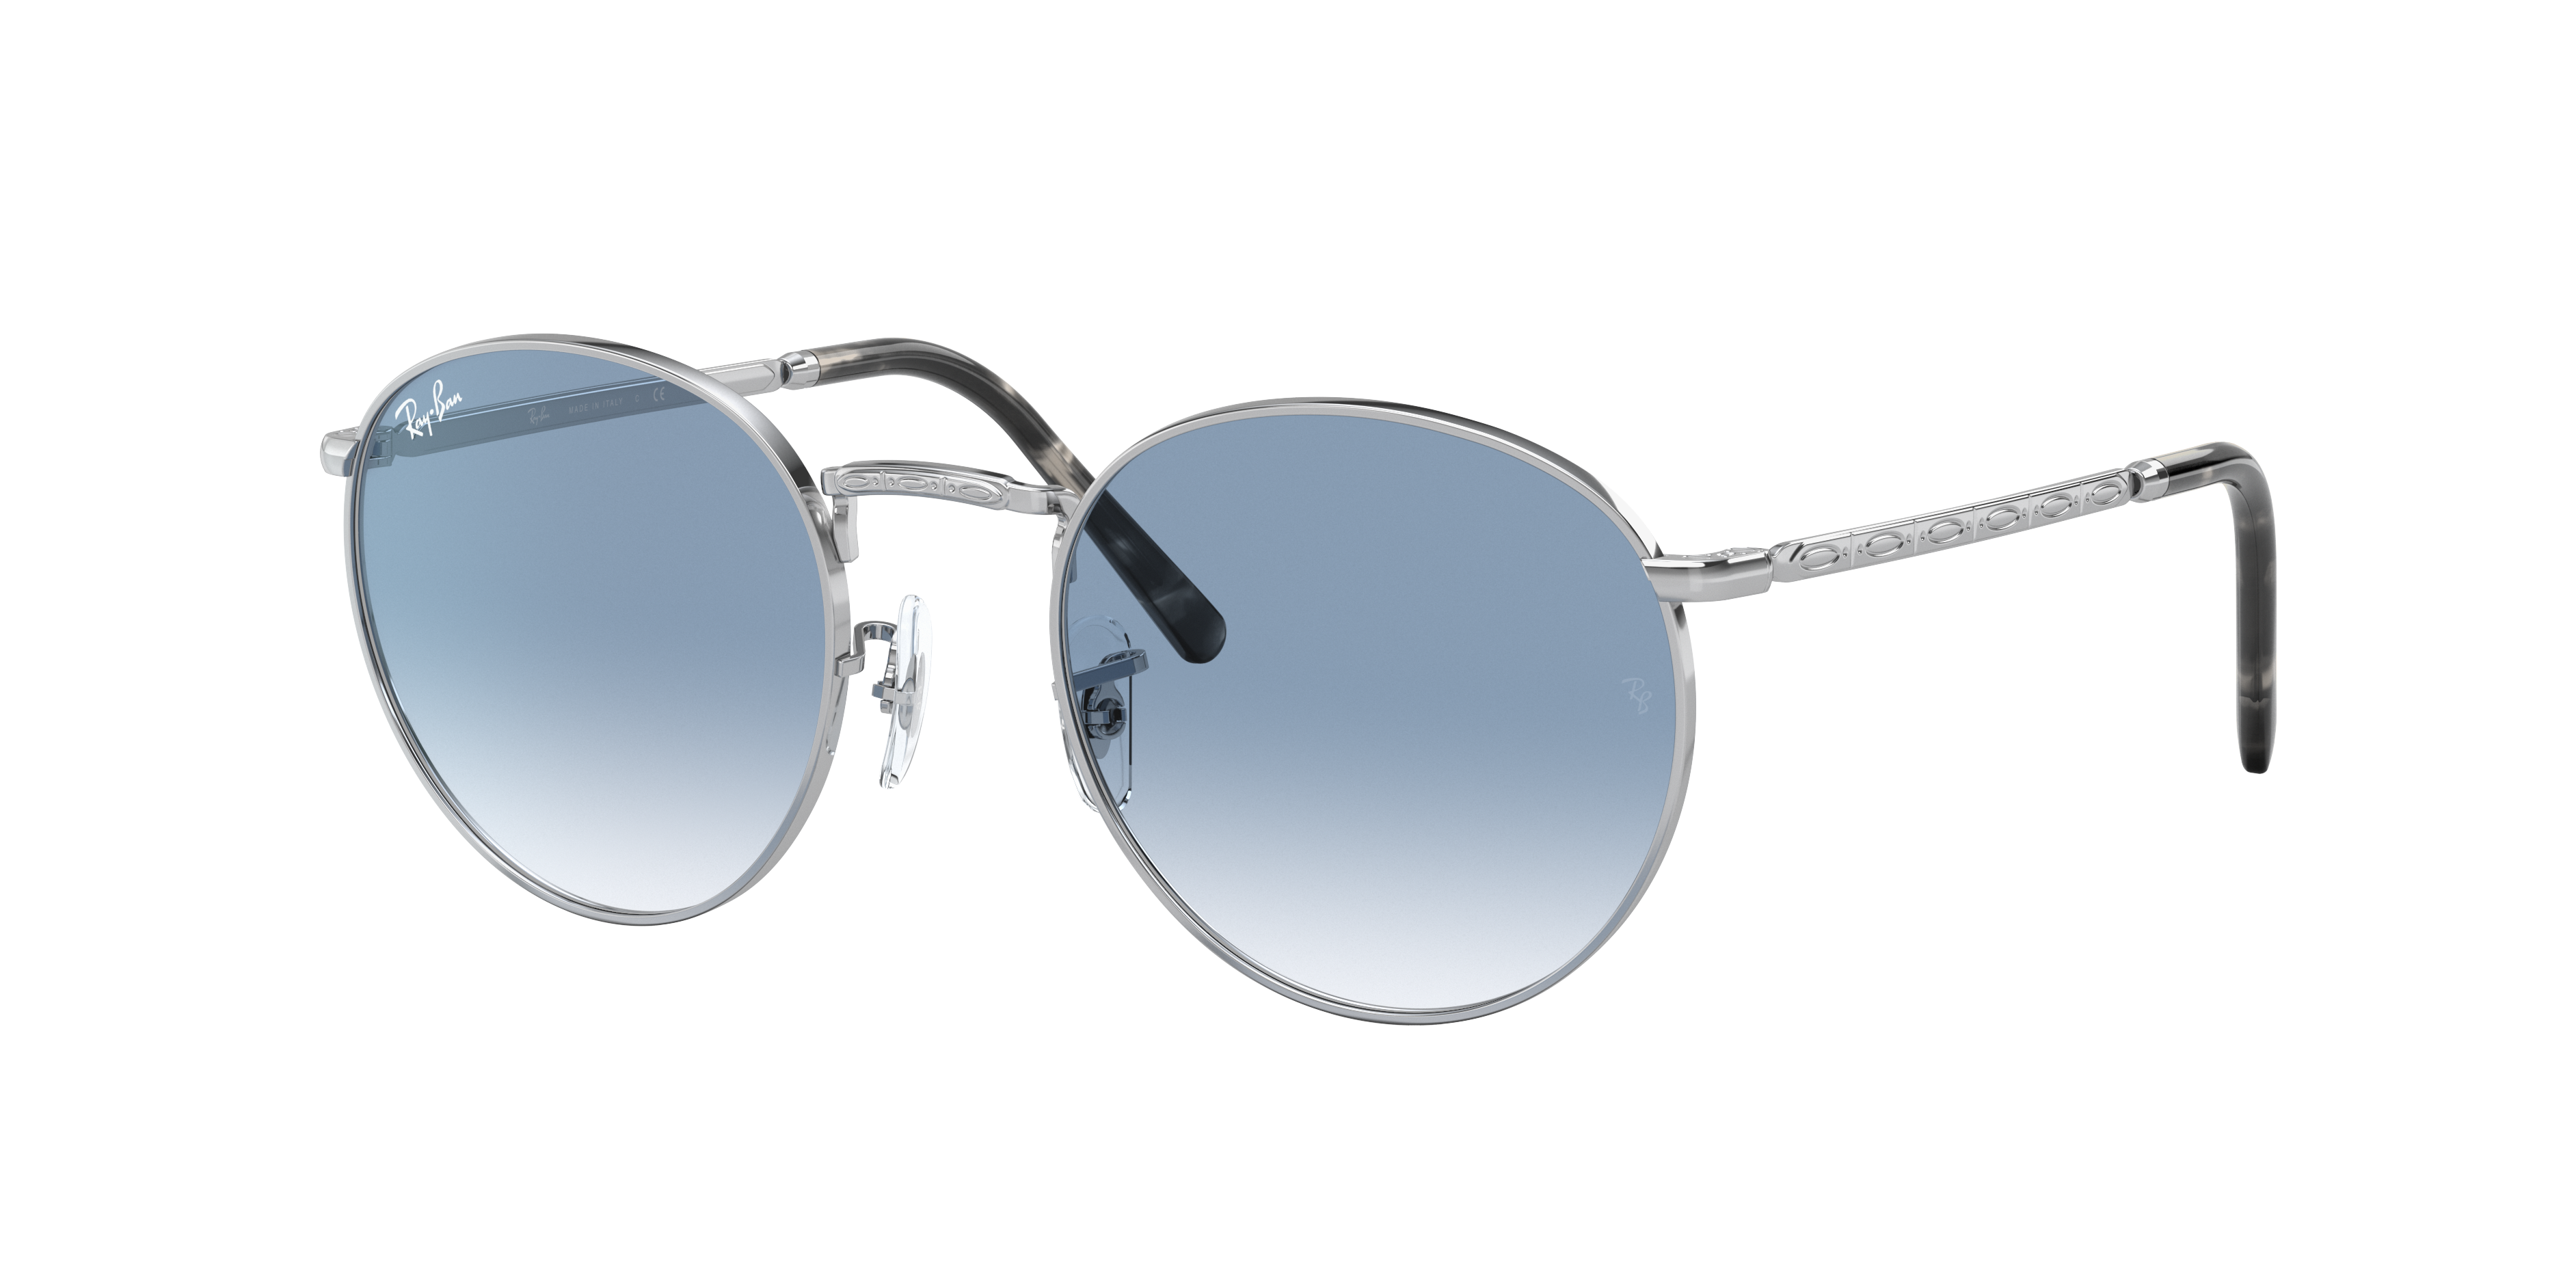 New Round Sunglasses in Silver and Blue | Ray-Ban®